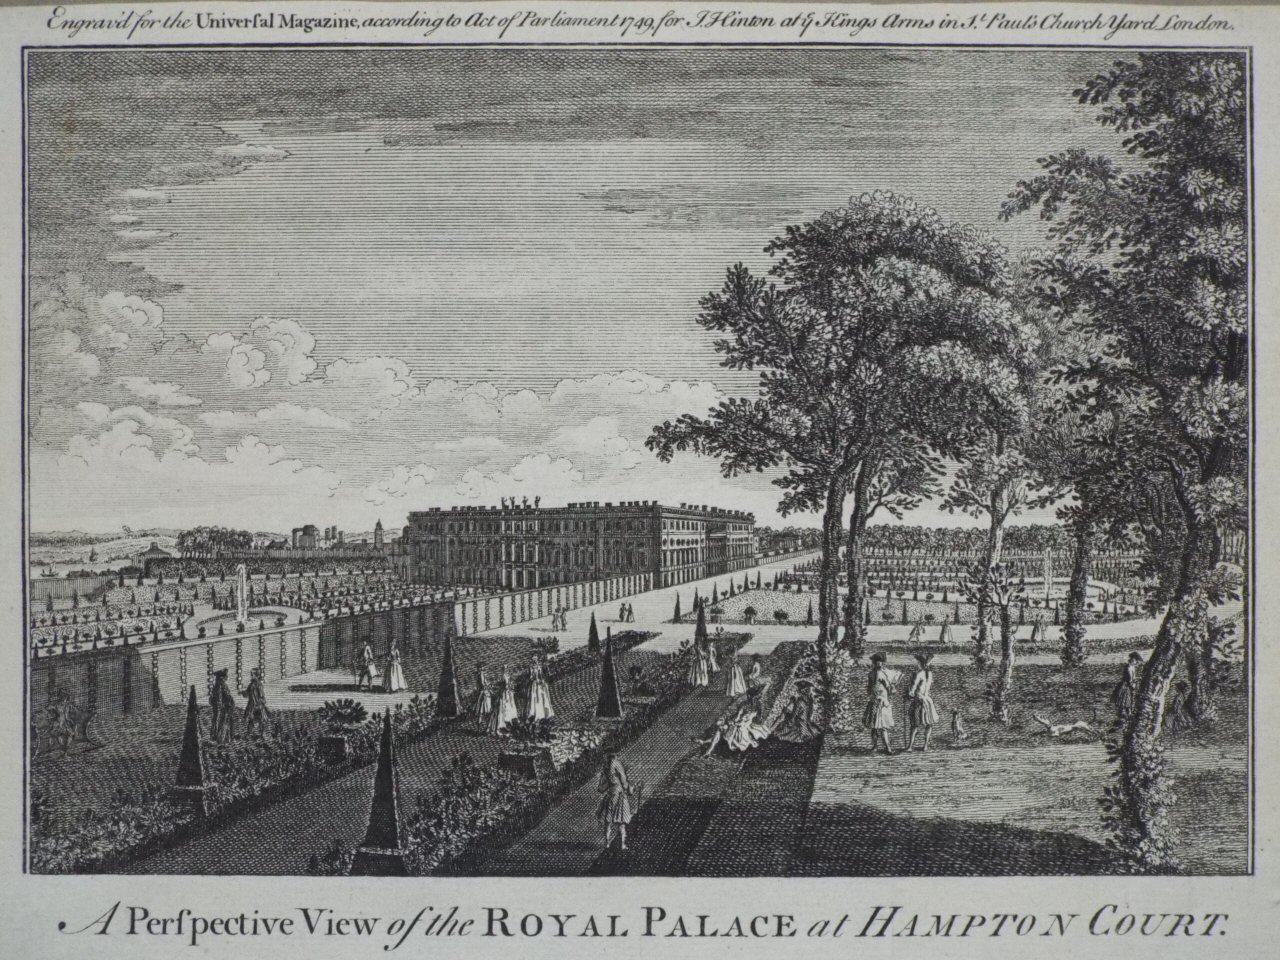 Print - A Perspective View of the Royal Palace at Hampton Court.